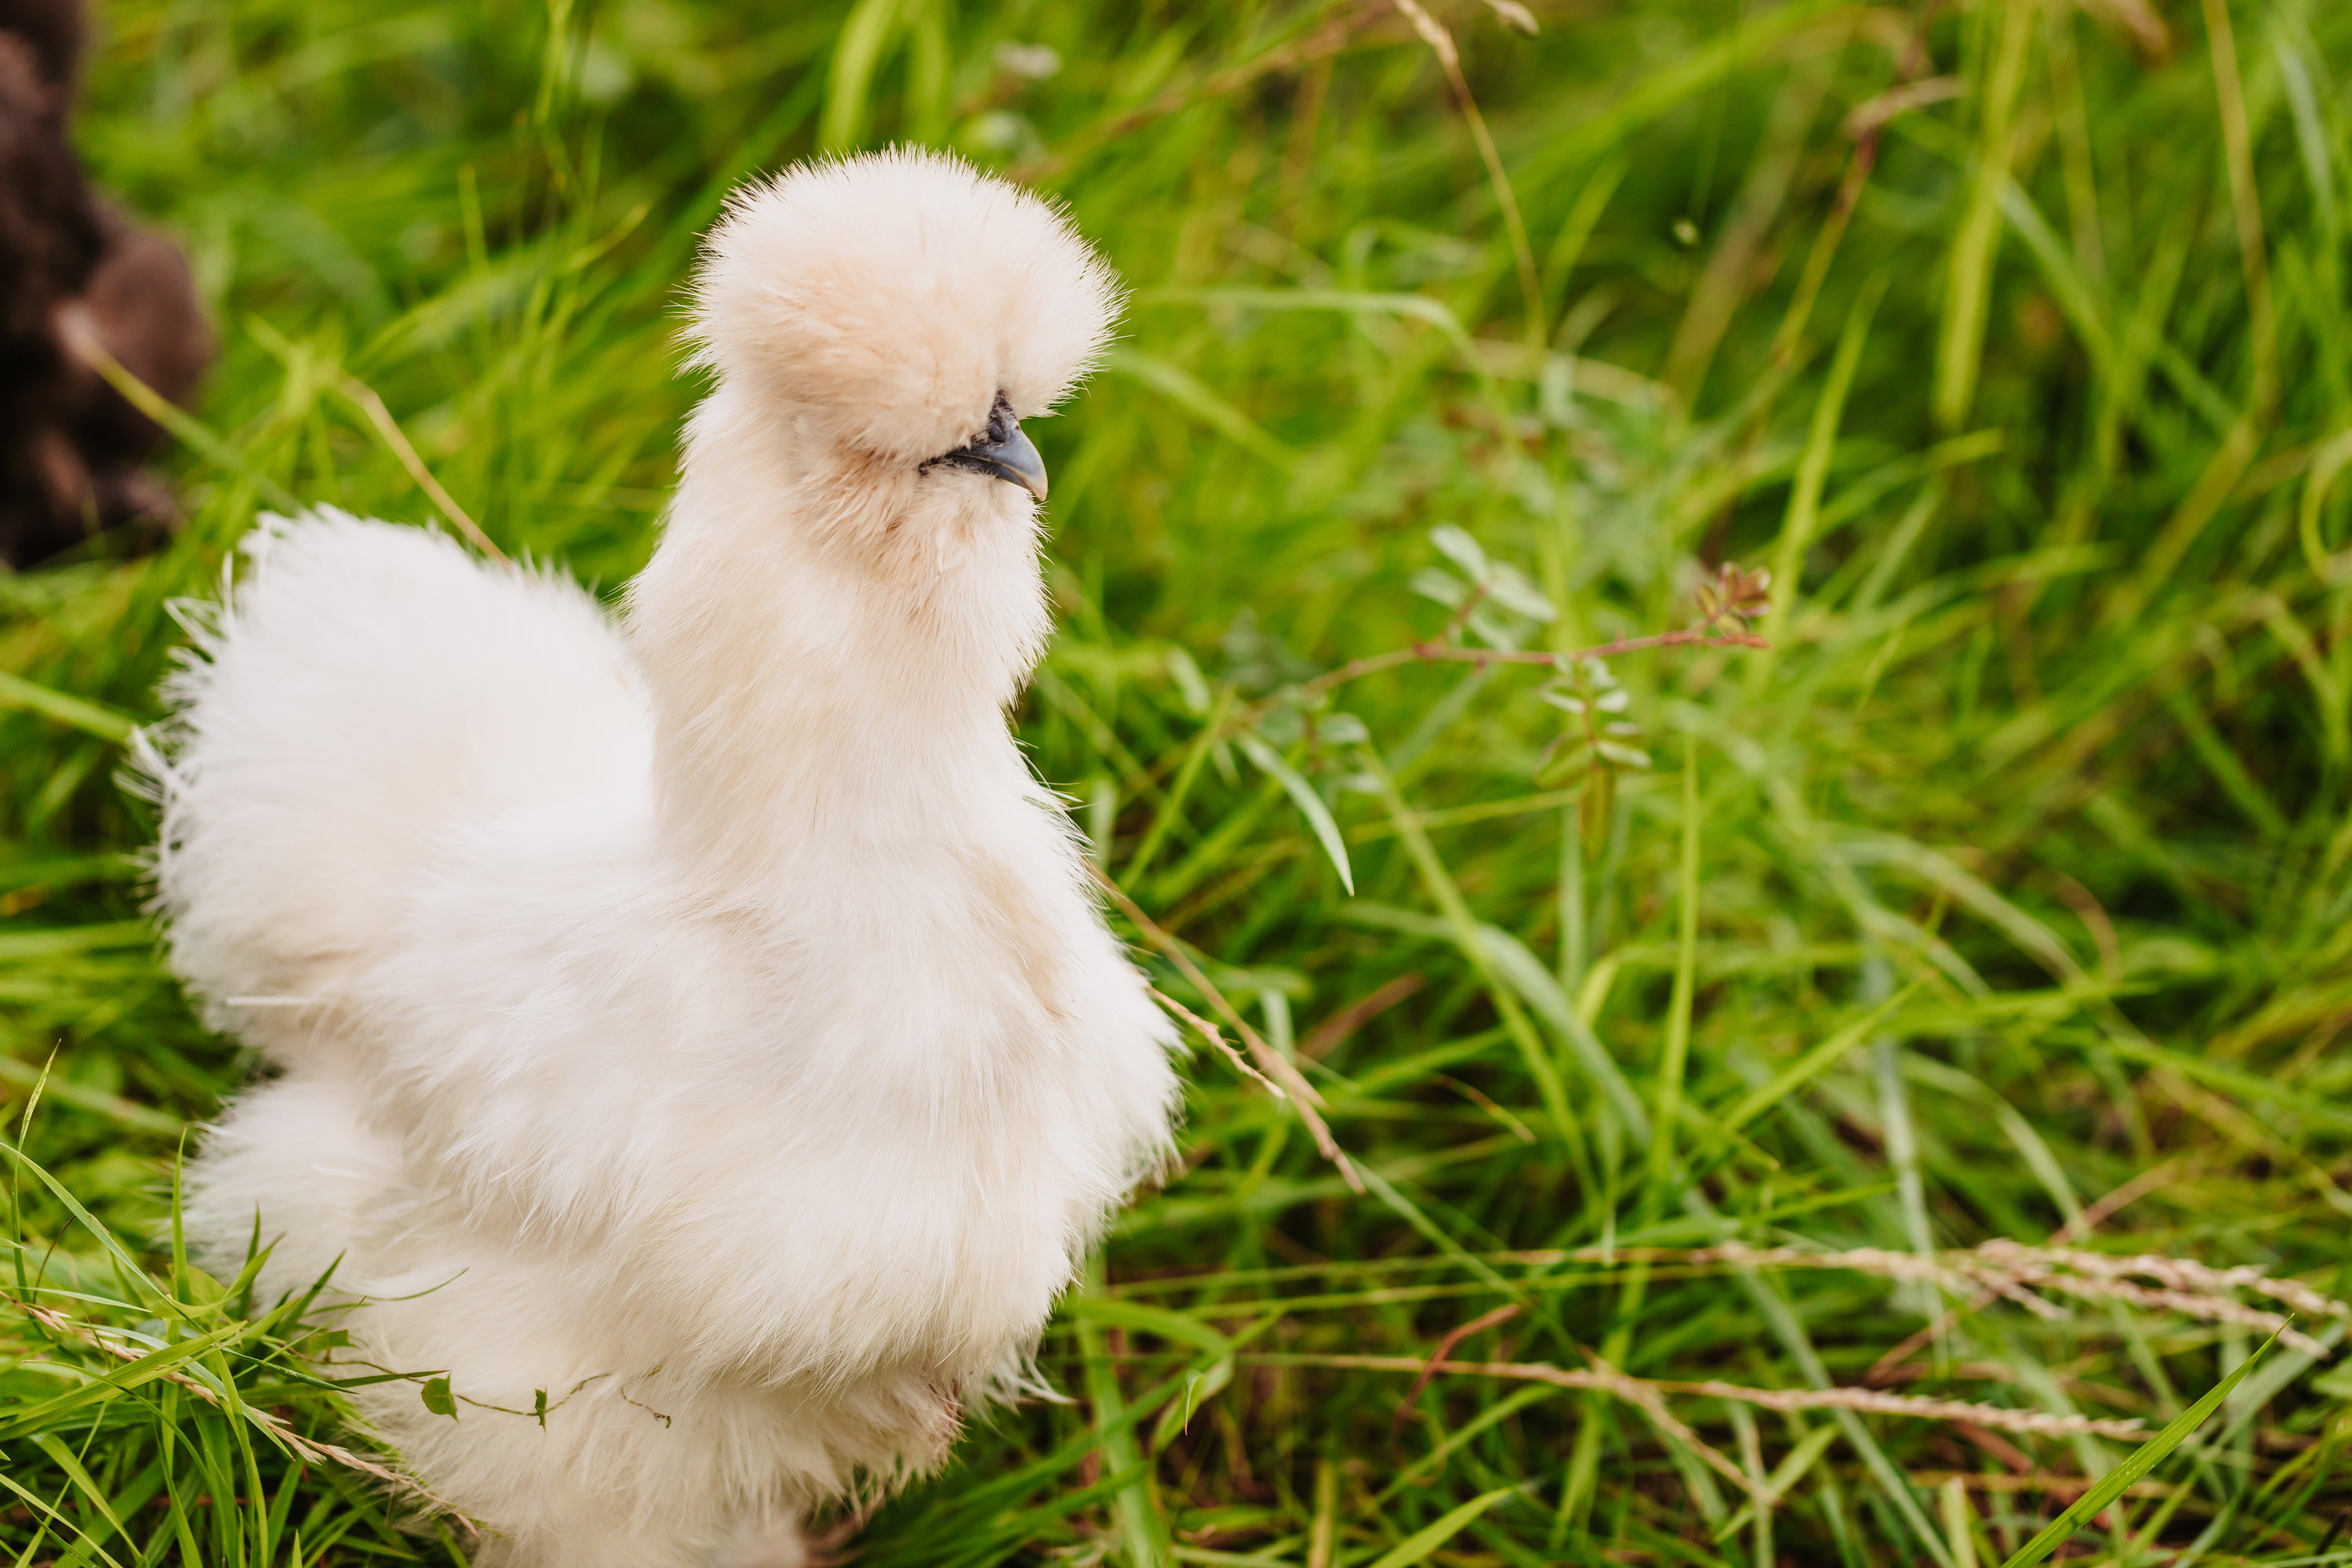 A white silkie hen with fluffy feathers that cover its face